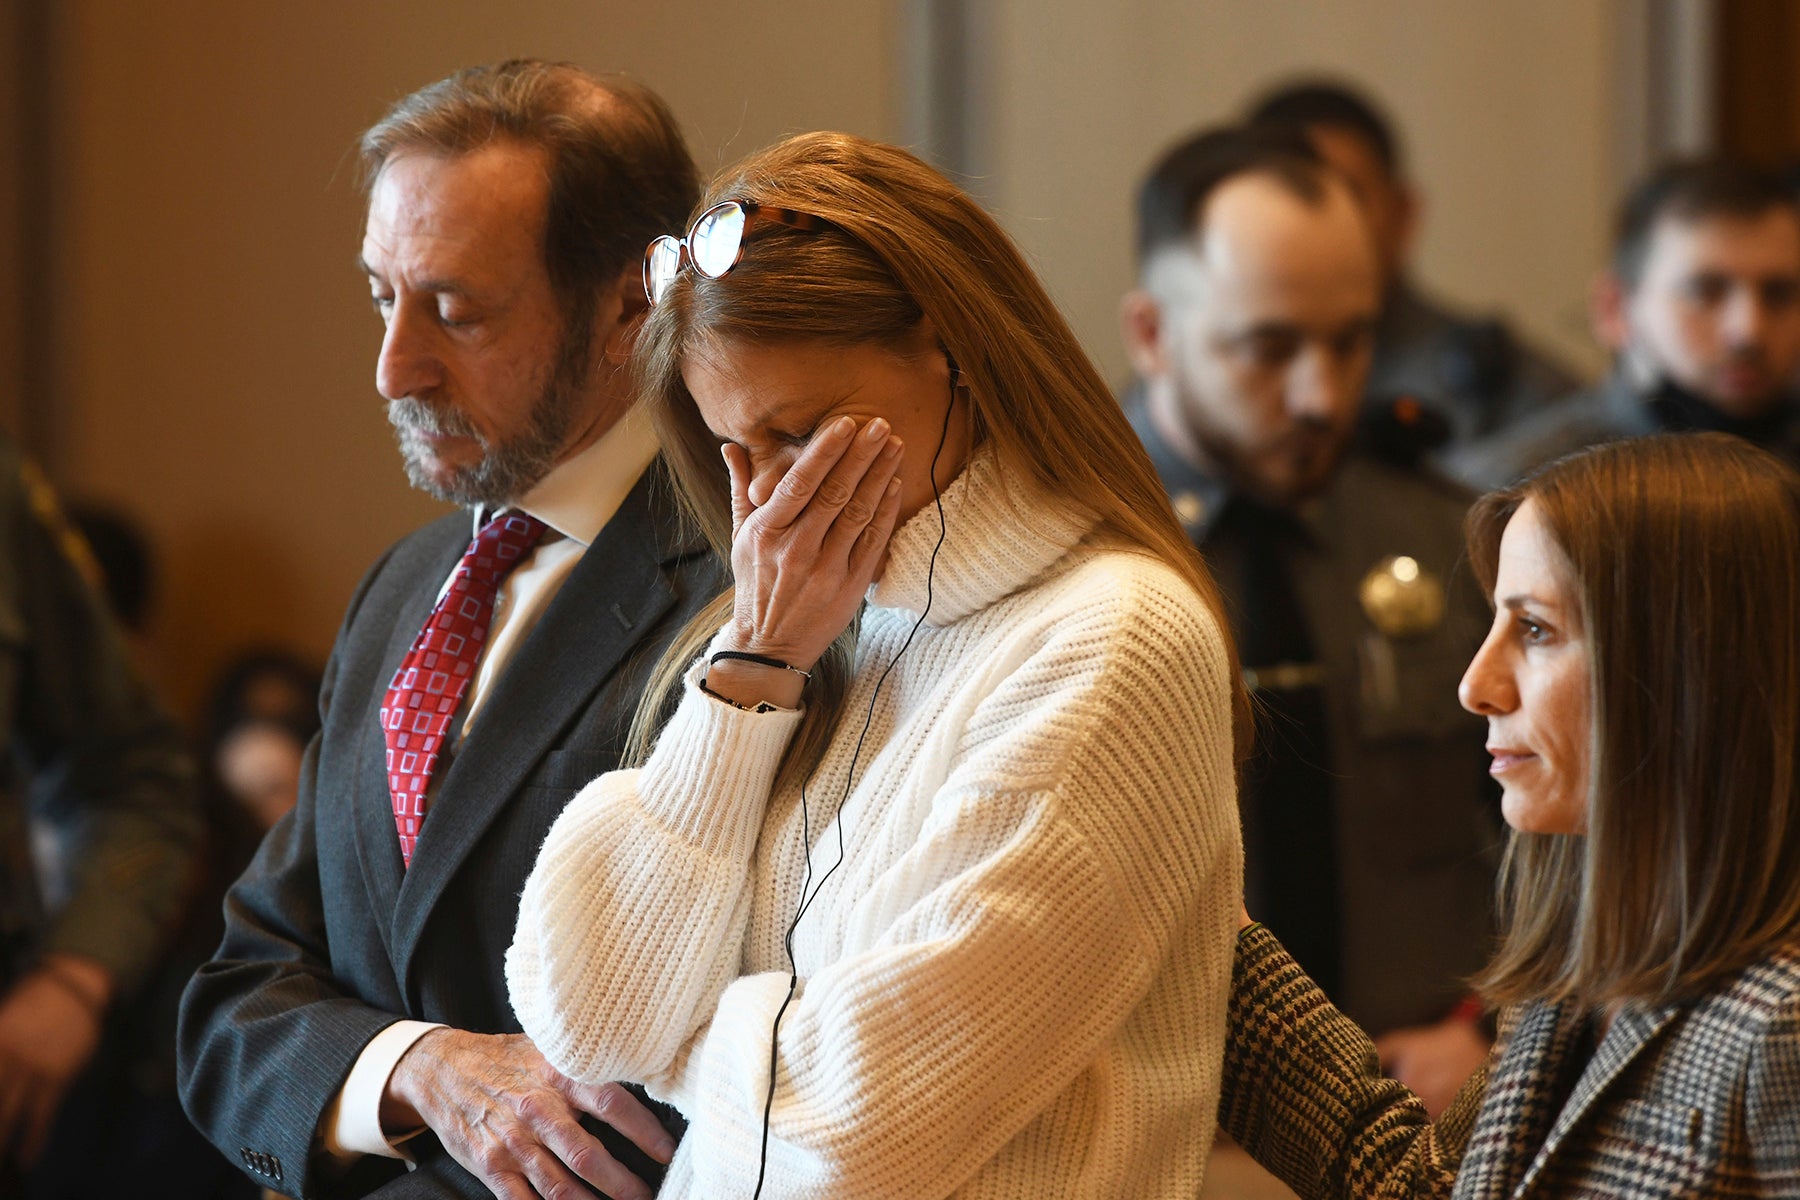 Michelle Troconis broke down in tears when she was convicted of conspiracy to commit murder in the Jennifer Dulos murder case